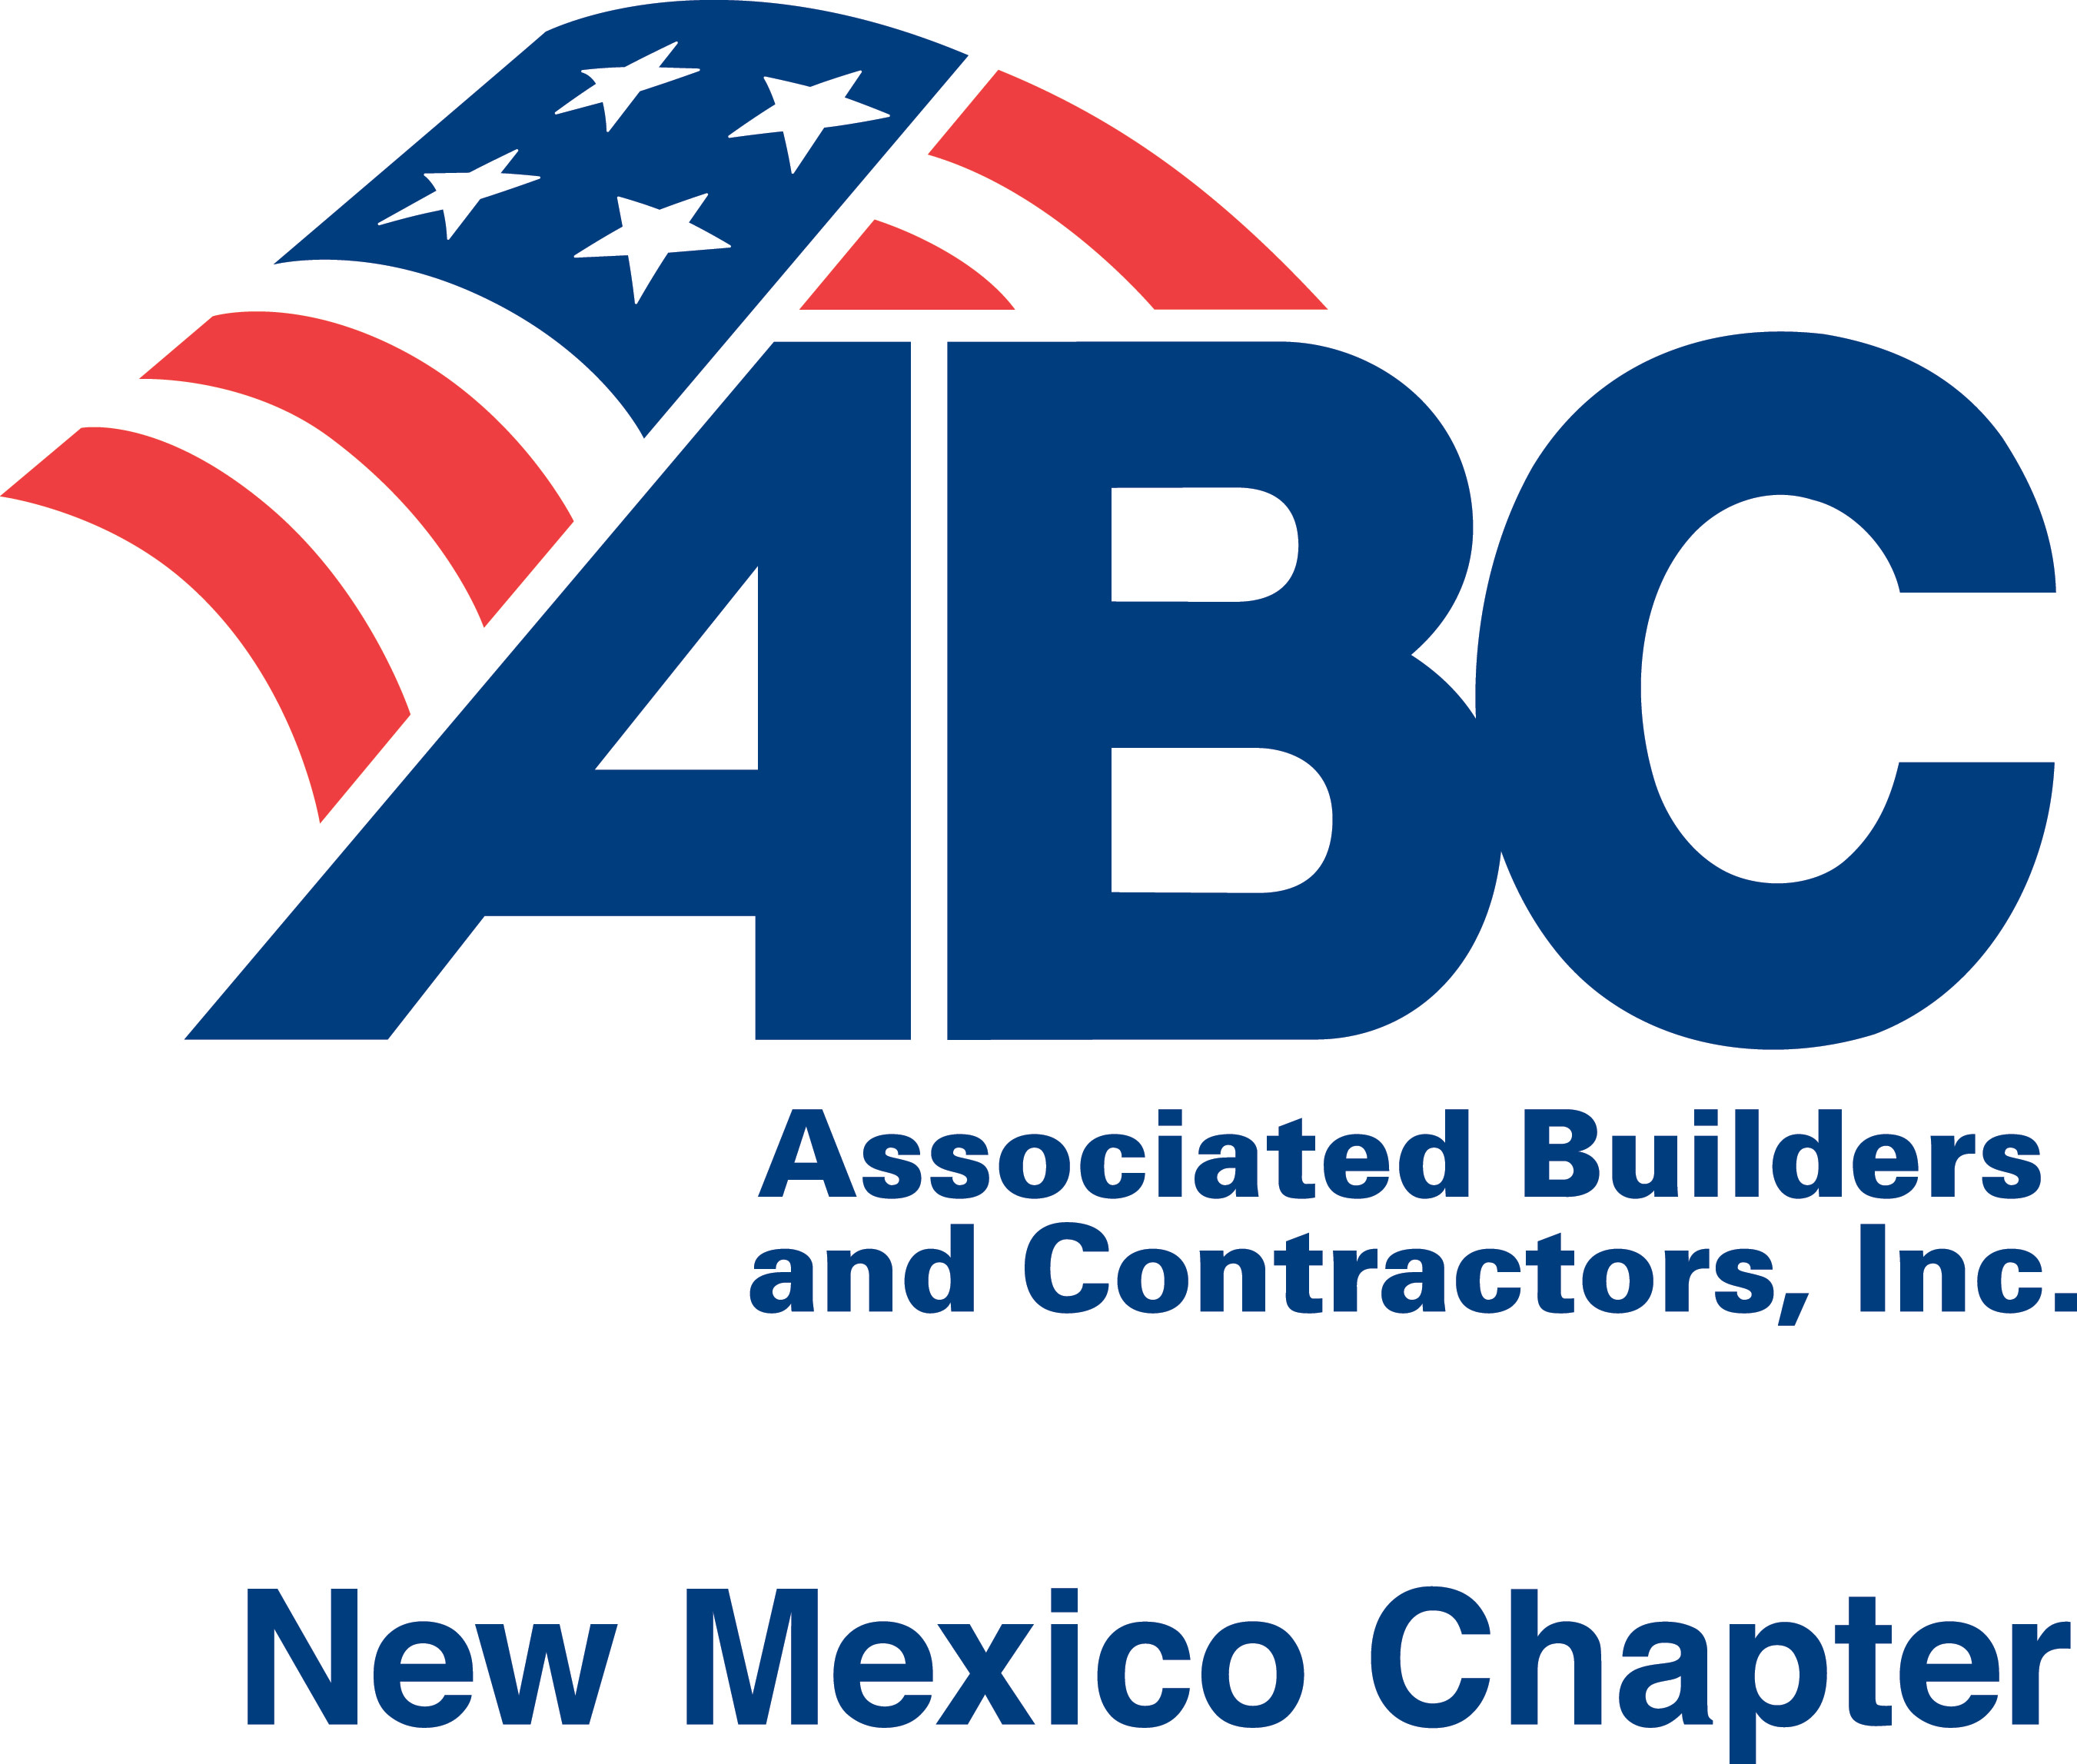 Associated Builders and Contractors, Inc. New Mexico Chapter